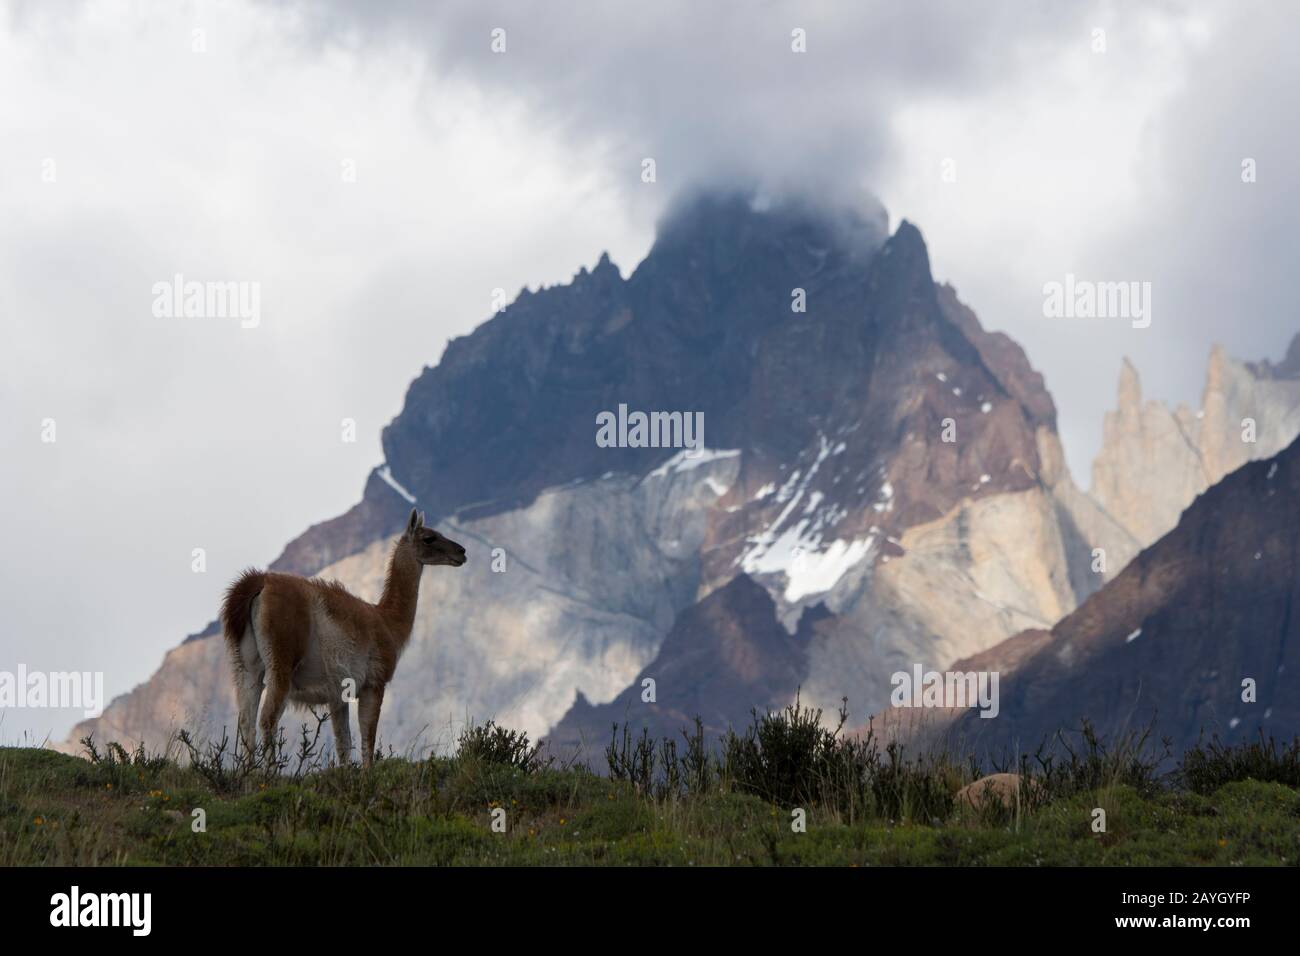 A guanaco (Lama guanicoe) male in Torres del Paine National Park in southern Chile with the Cuernos del Paine (Horns) in the background. Stock Photo